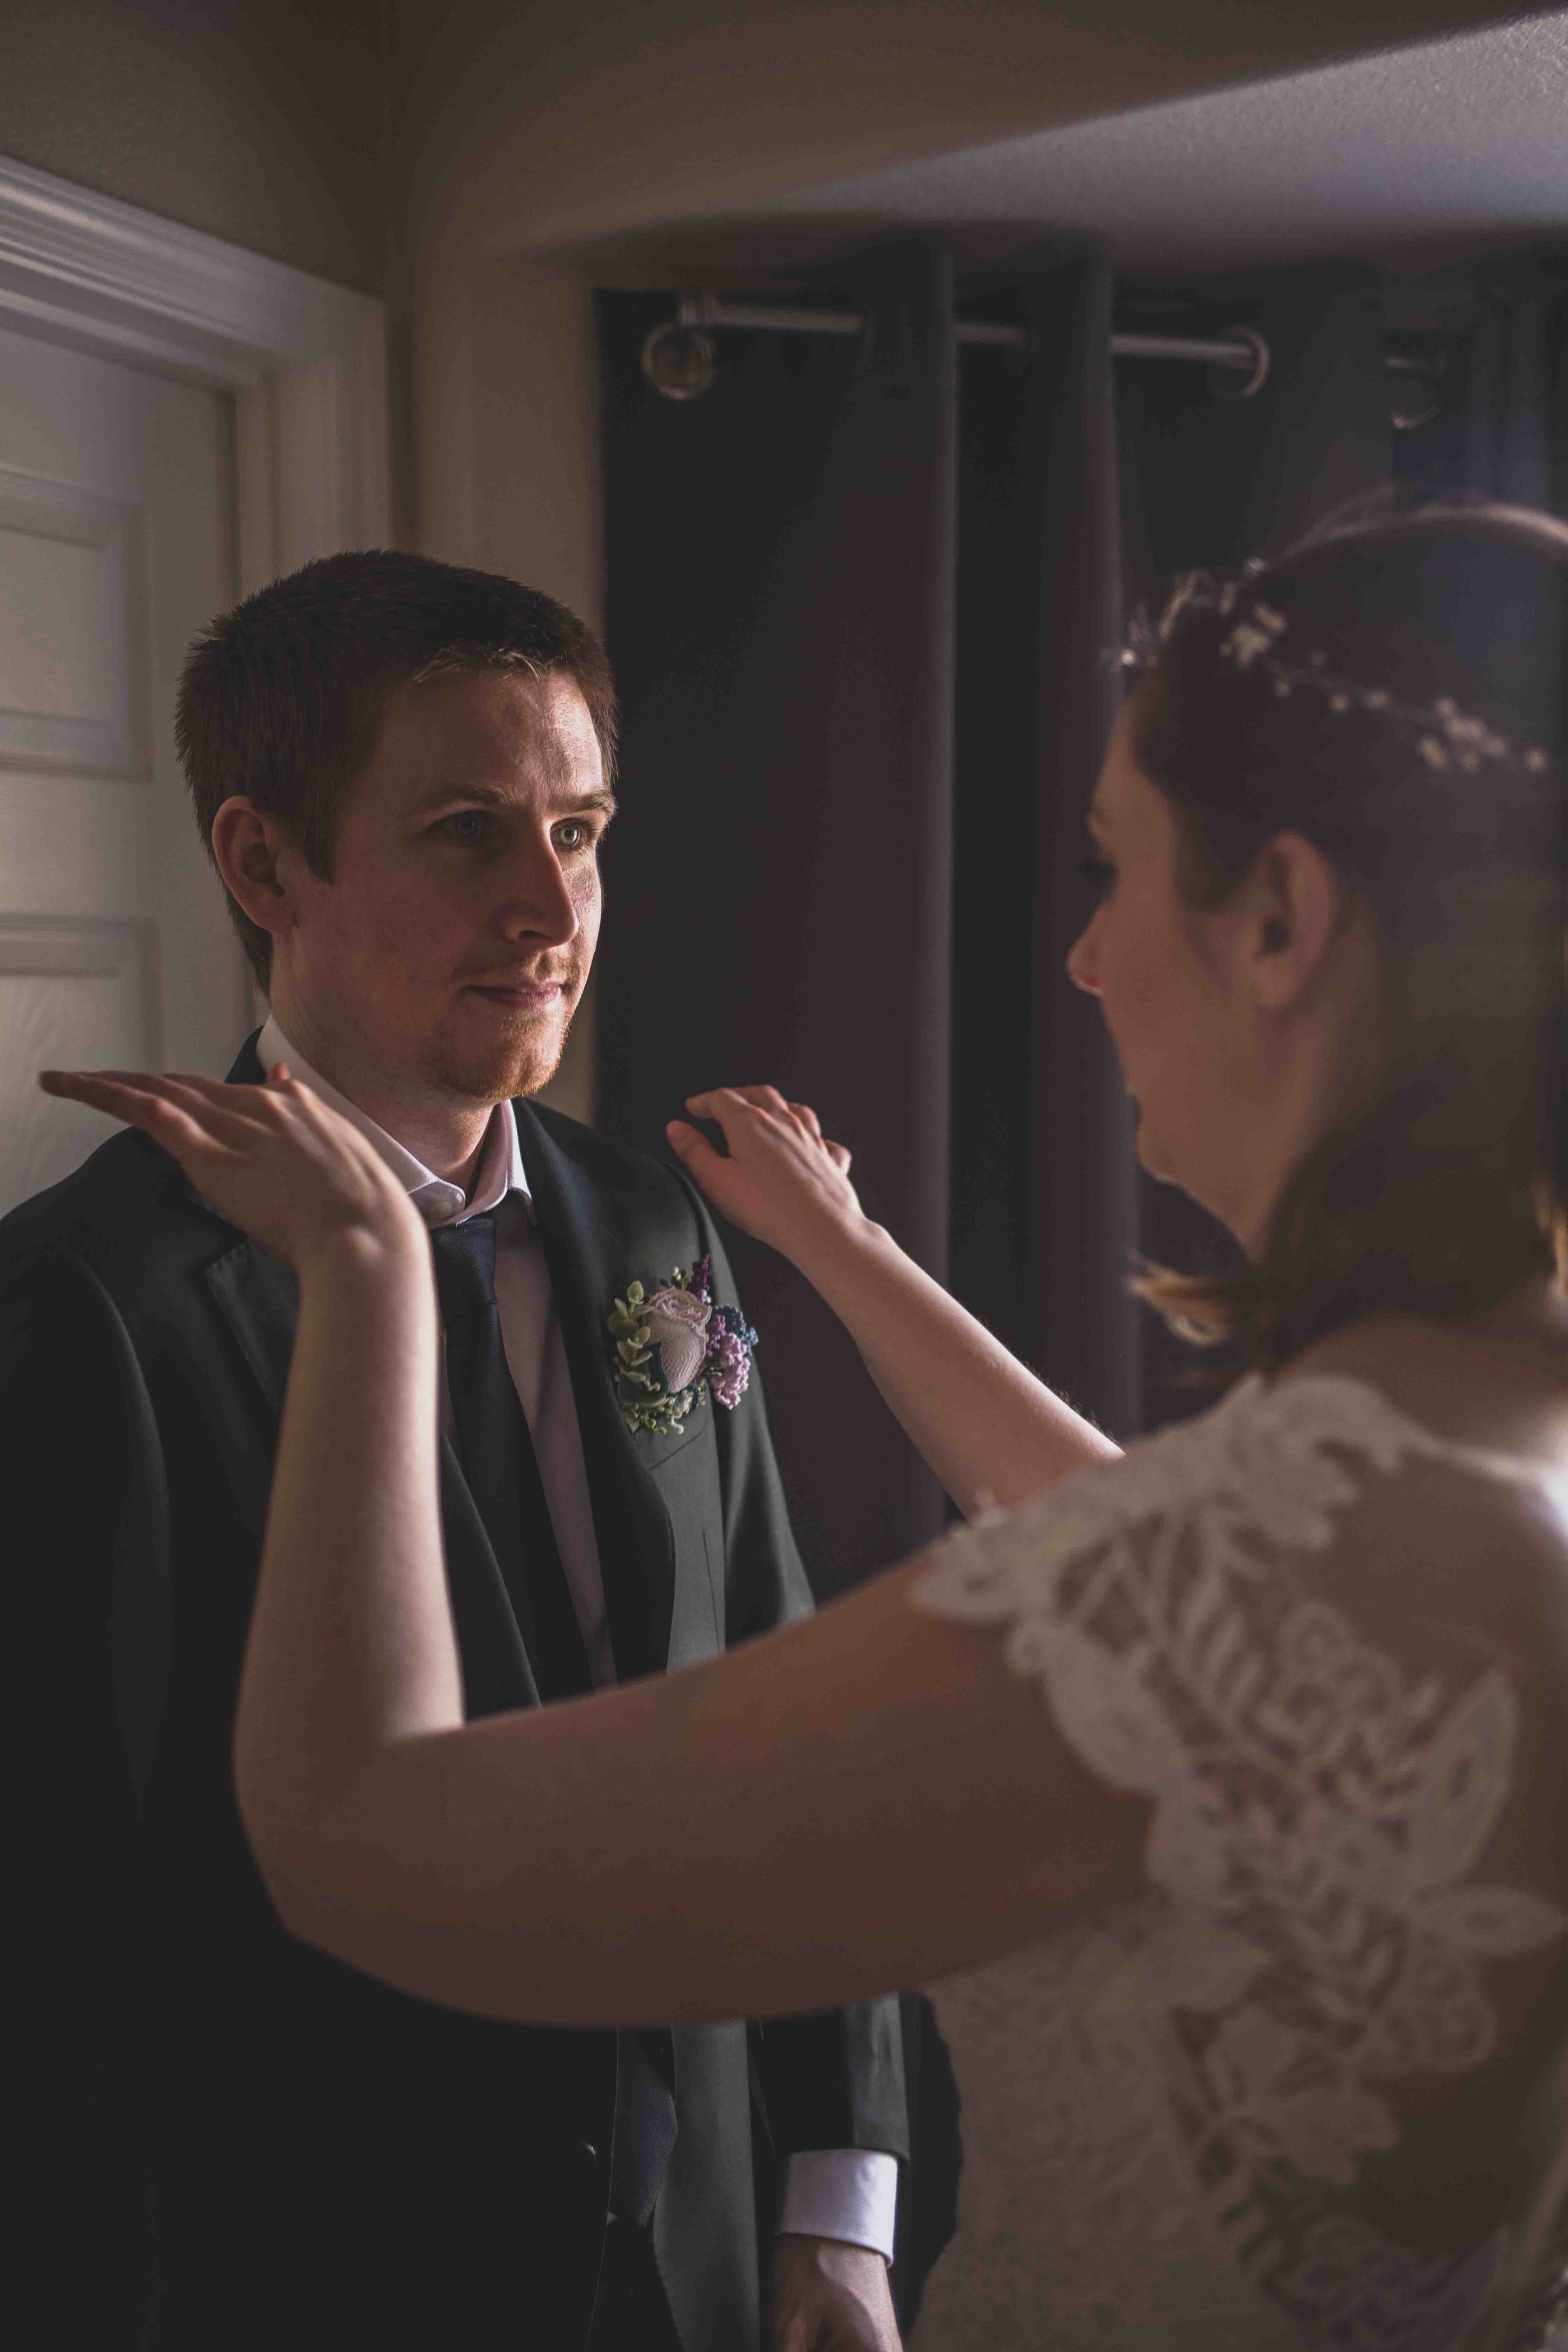 Bride and Groom getting ready together for their wedding day at home by Gilbert, Arizona Wedding Photographer Jennifer Lind Schutsky.